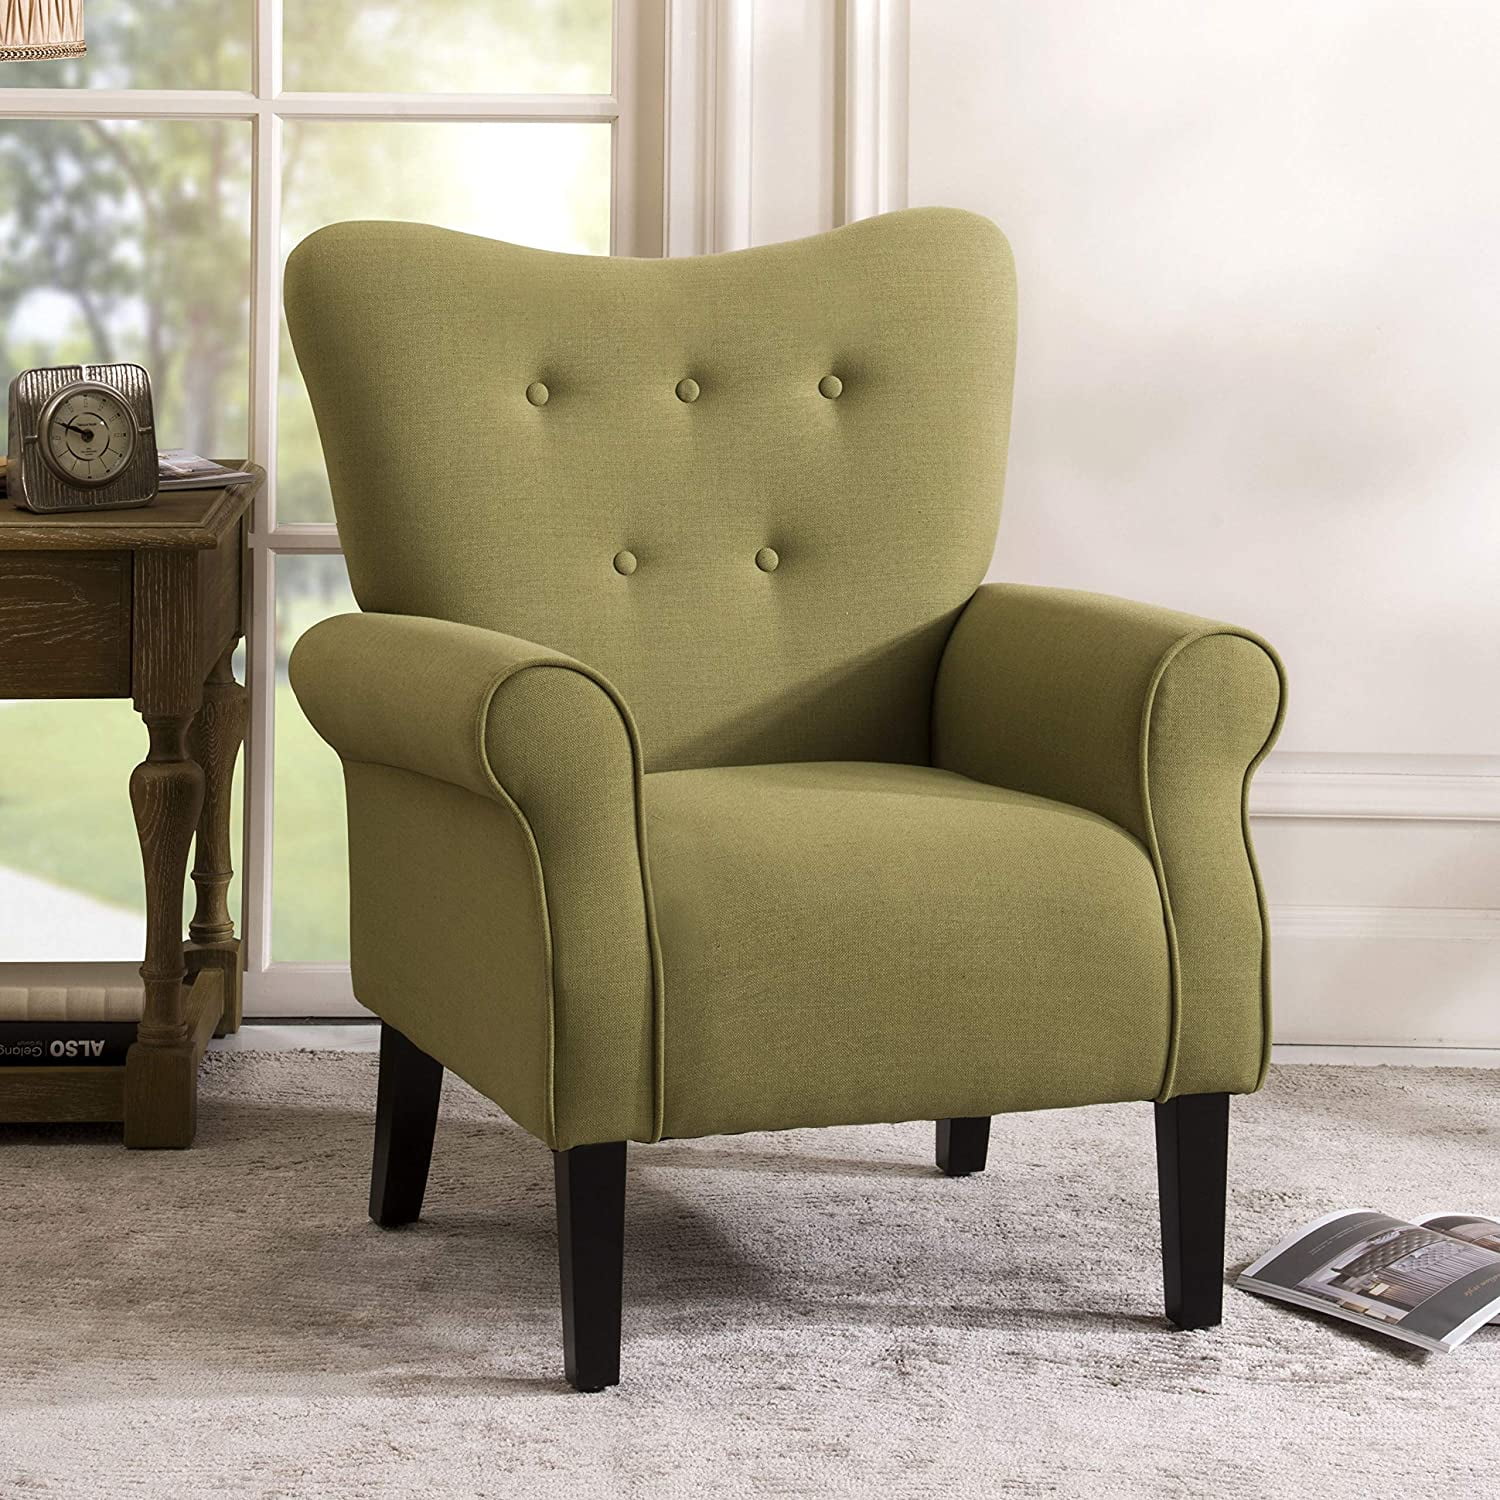 Best Quality Upholstered Living Room Chairs